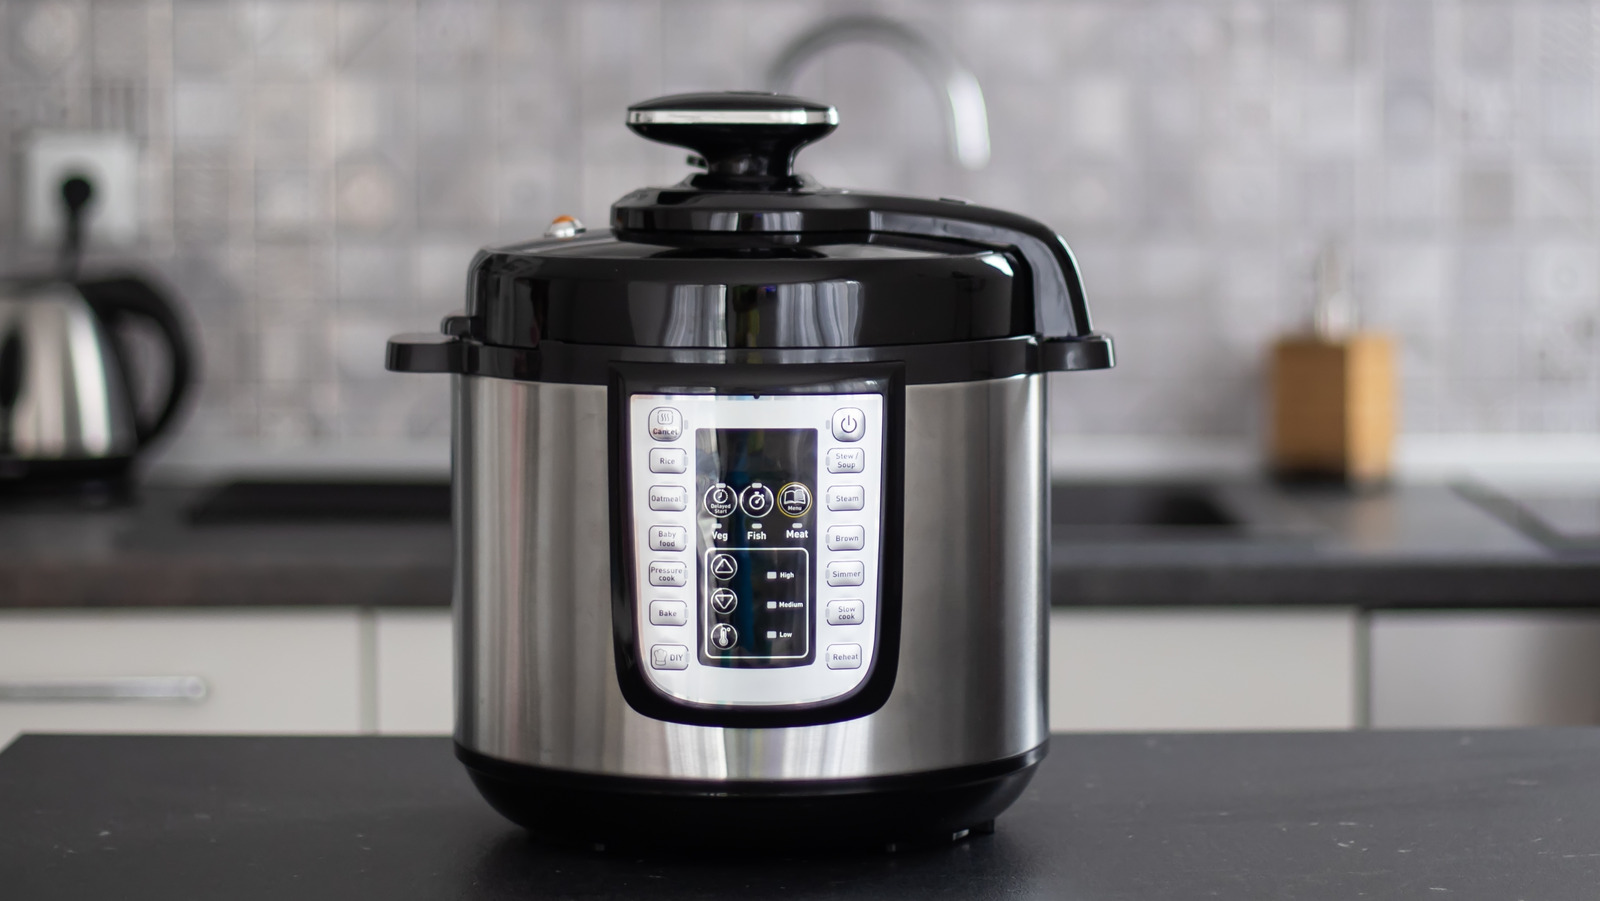 https://www.mashed.com/img/gallery/the-6-best-pressure-cookers-of-2022/l-intro-1648576649.jpg